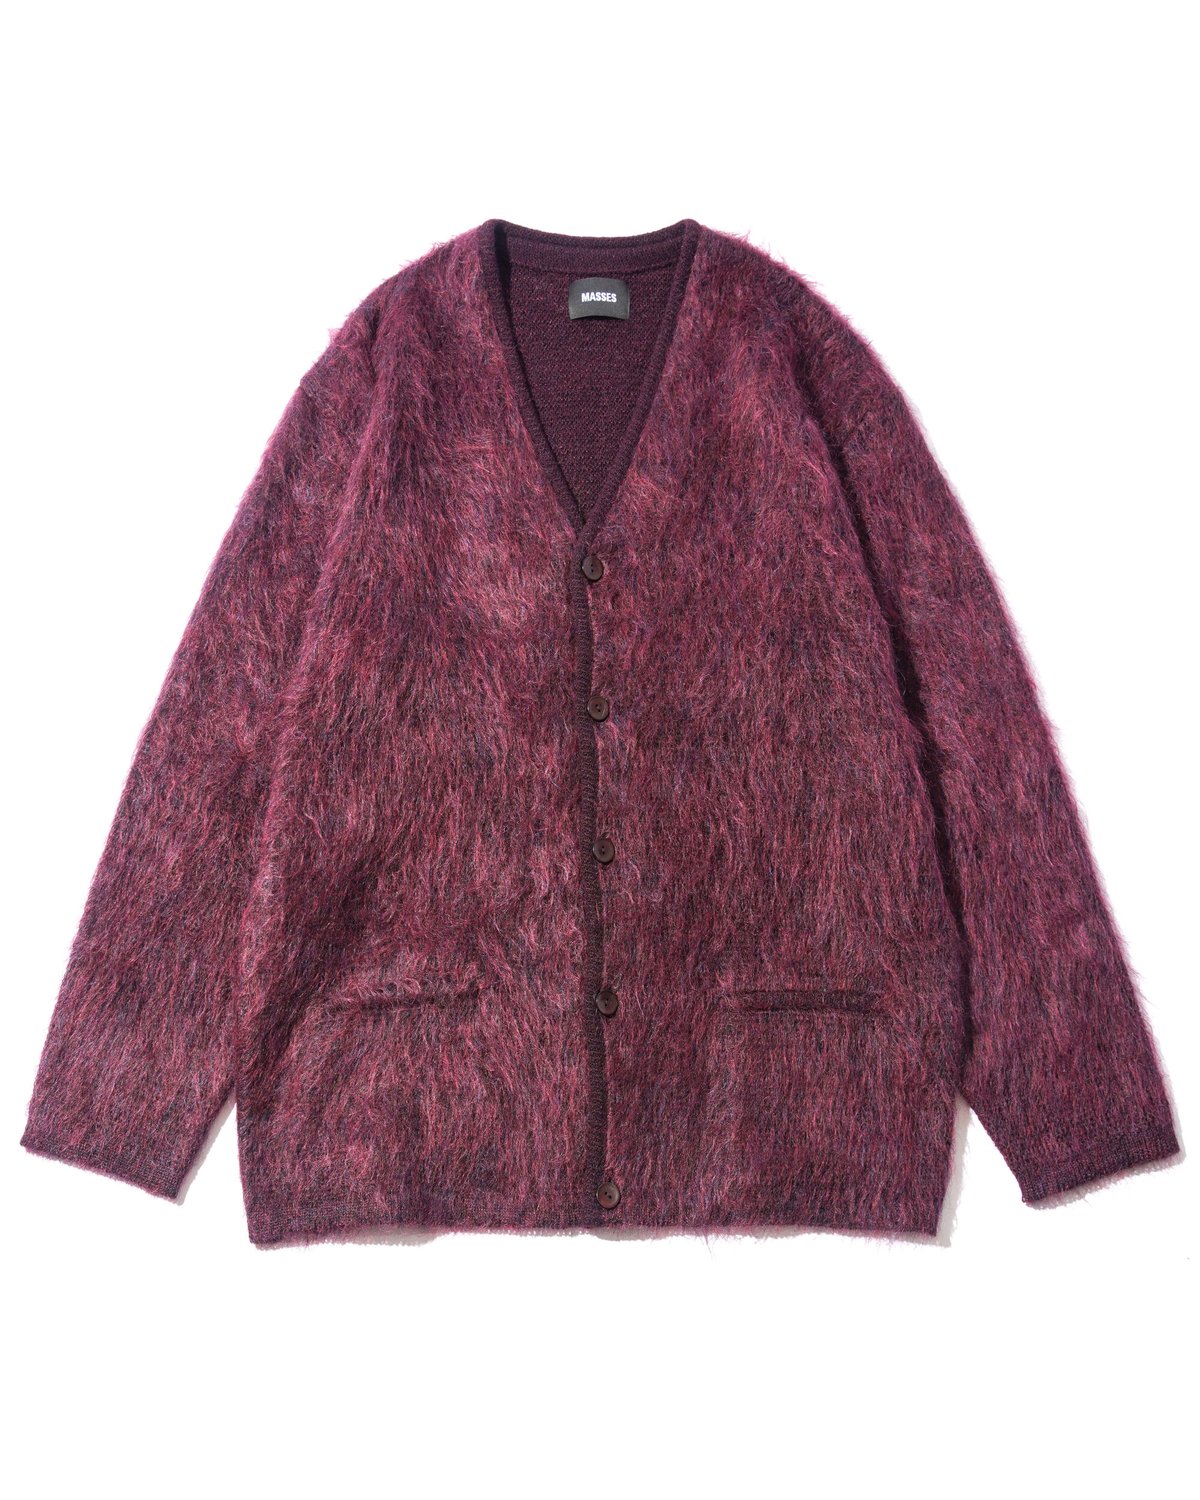 MOHAIR CARDIGAN | MASSES OFFICIAL ONLINE STORE